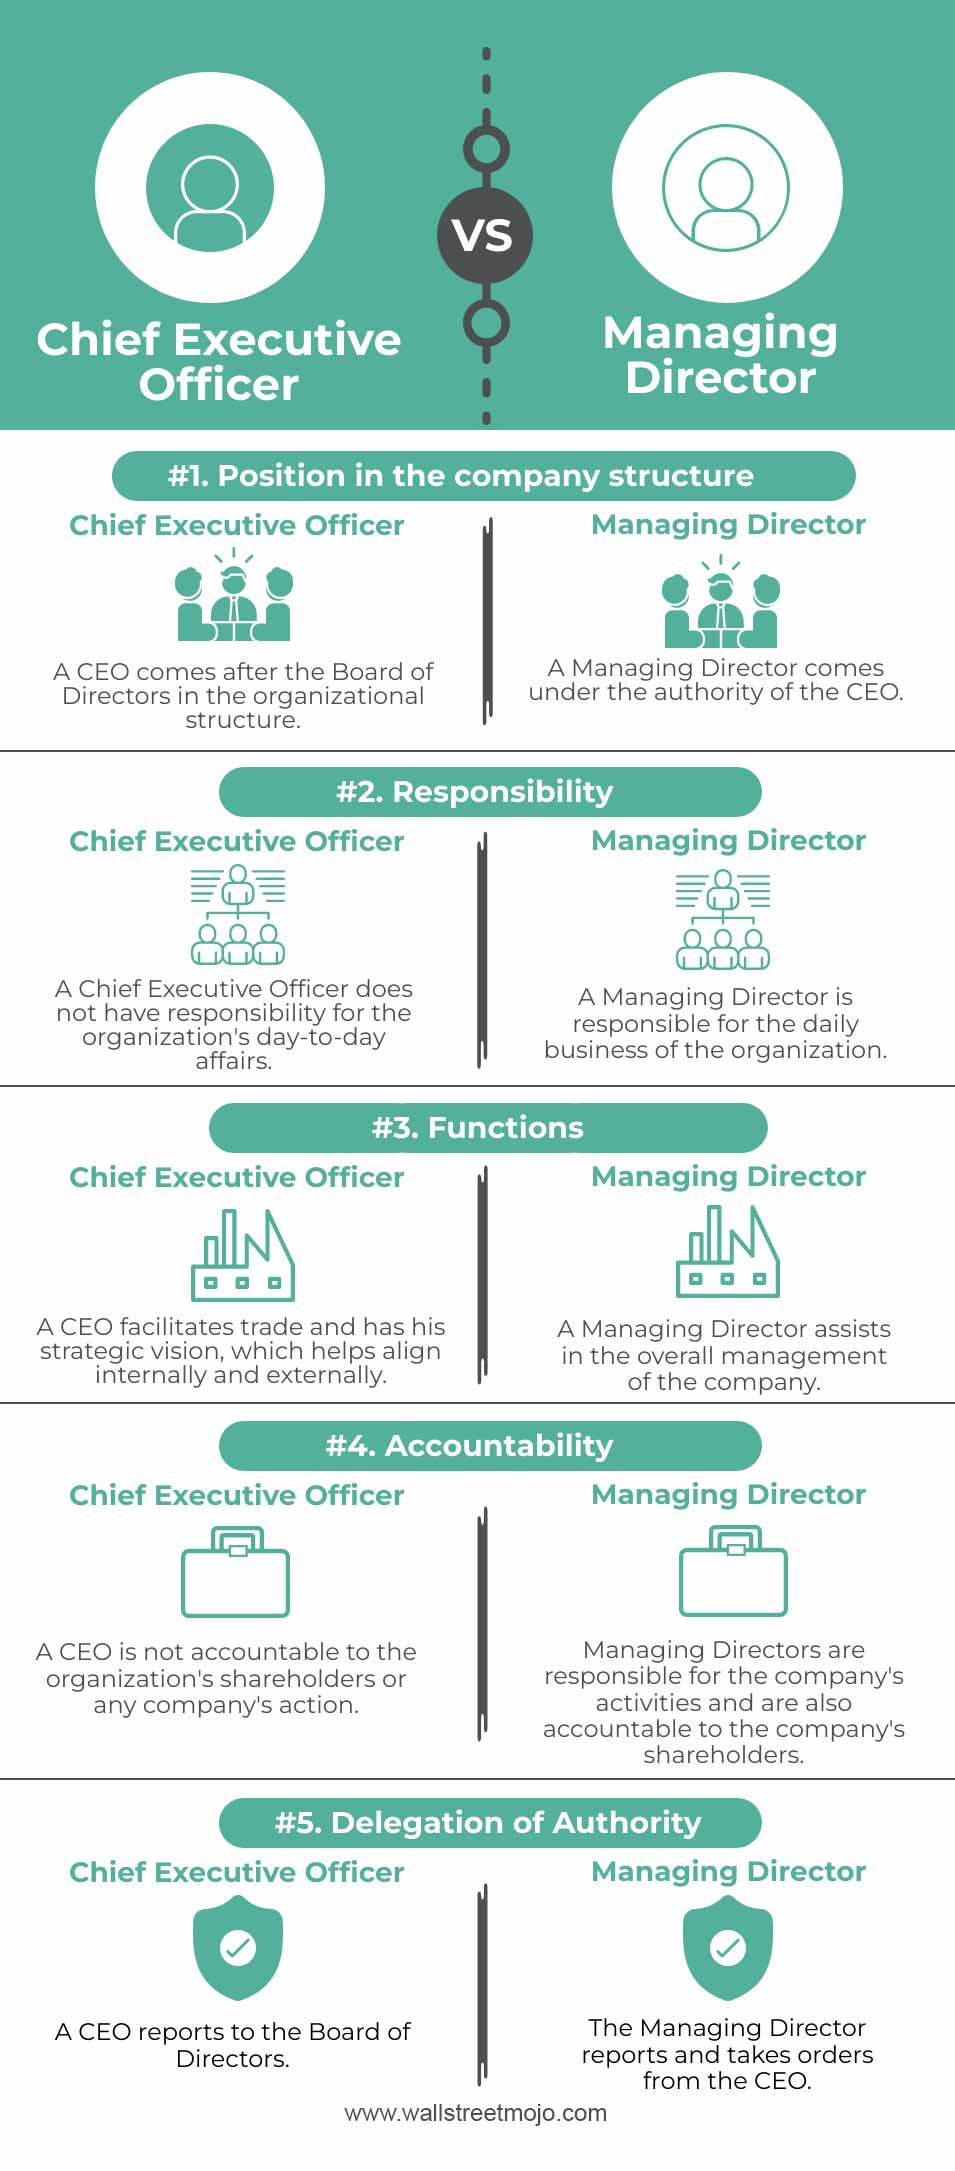 Chief-Executive-Officer-vs-Managing-Director-info-new